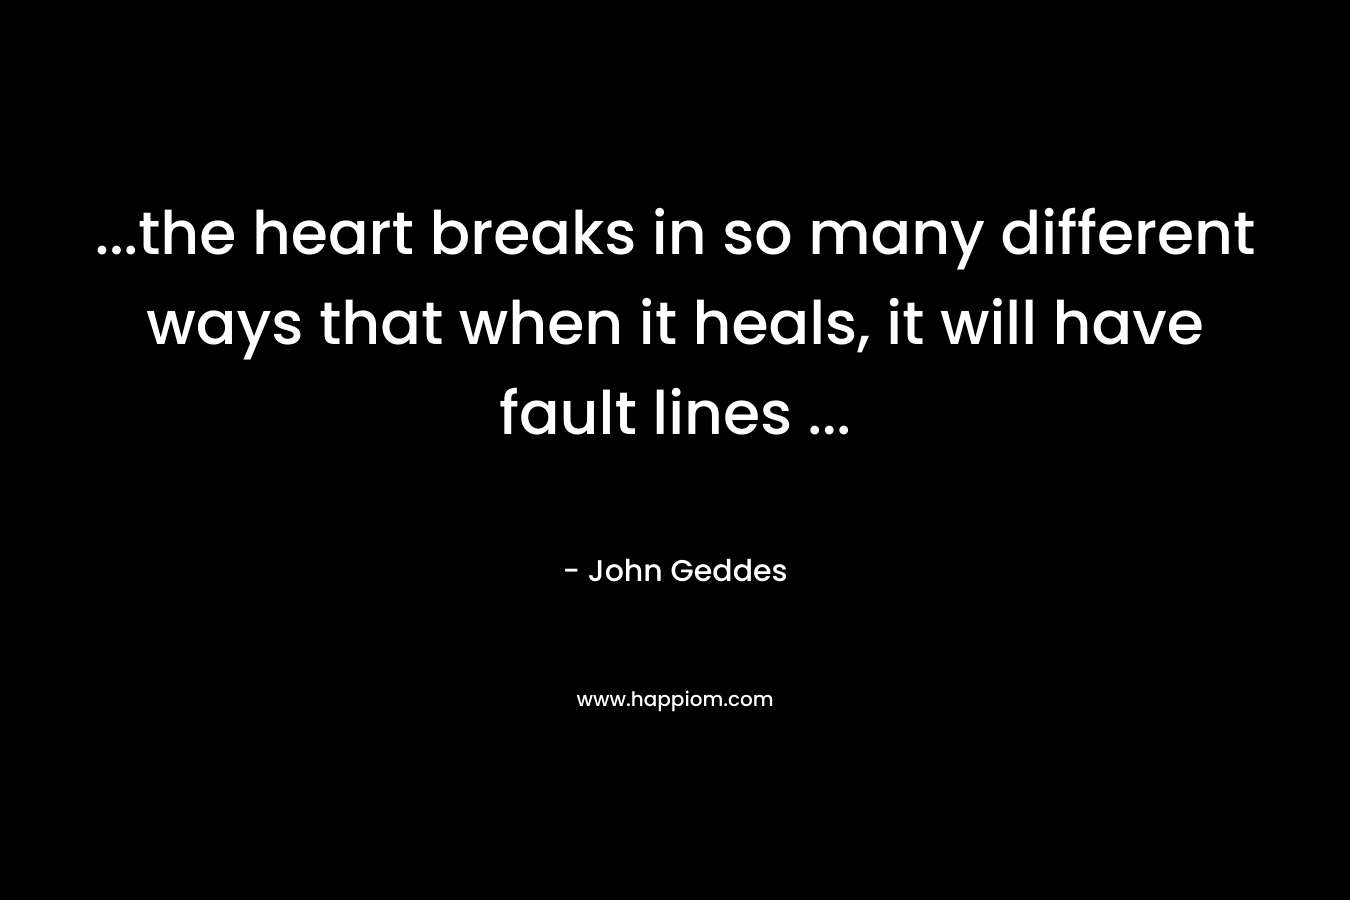 ...the heart breaks in so many different ways that when it heals, it will have fault lines ...